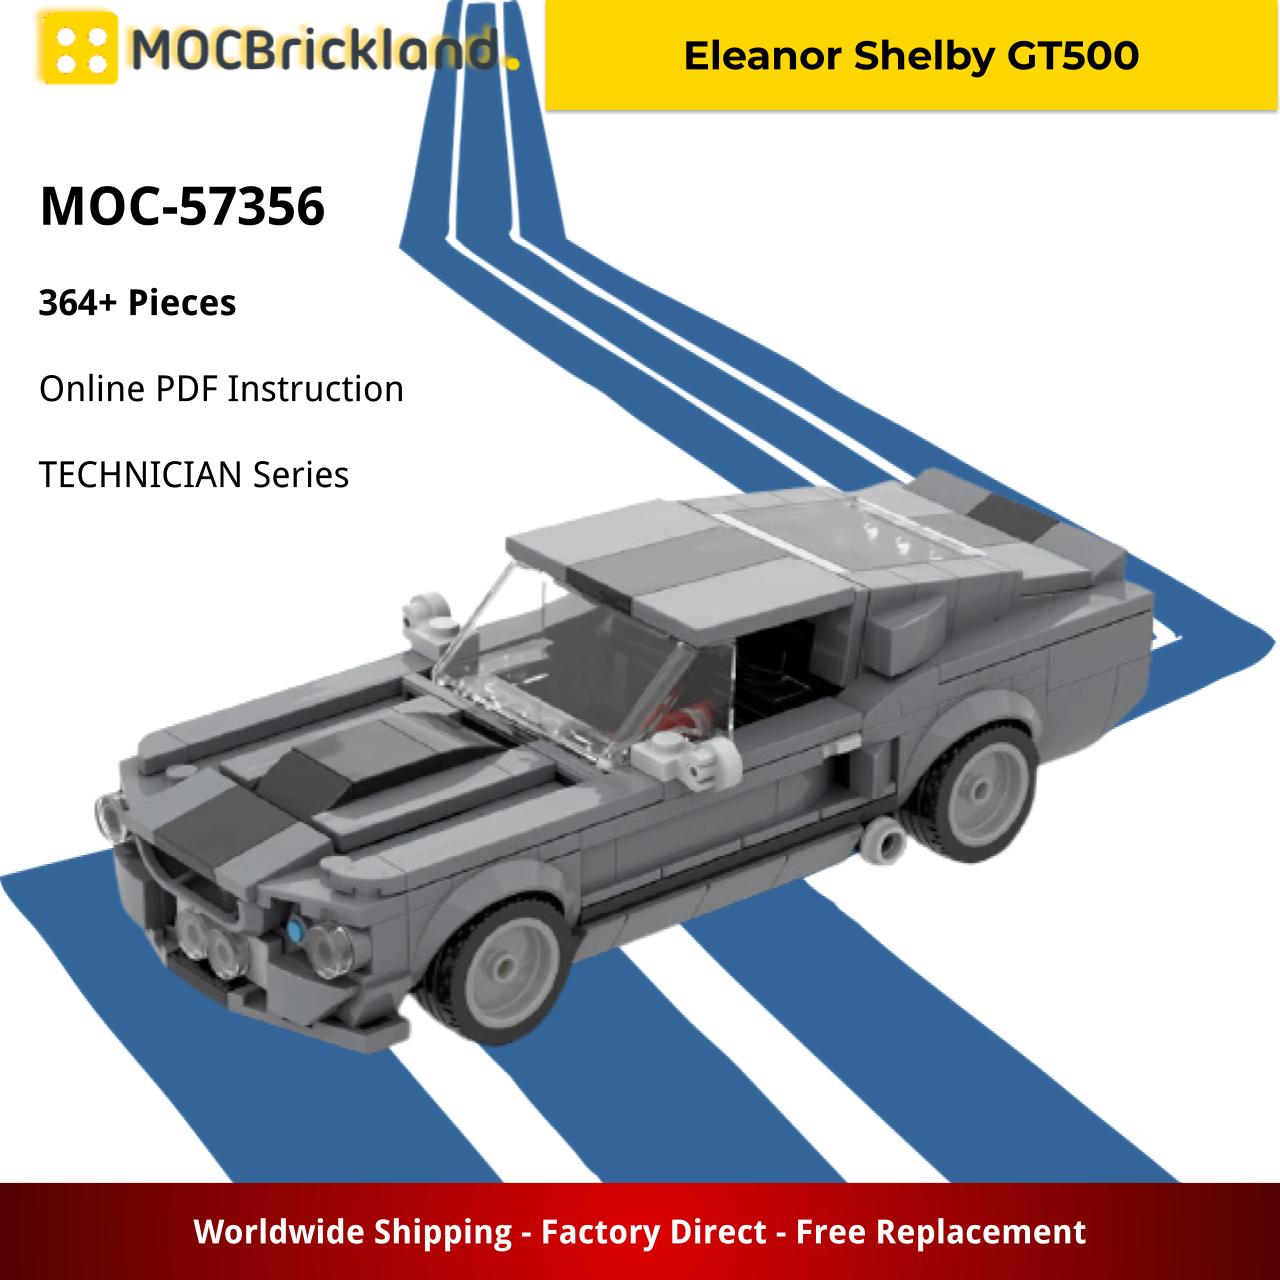 Eleanor Shelby GT500 TECHNICIAN MOC-57356 with 364 pieces